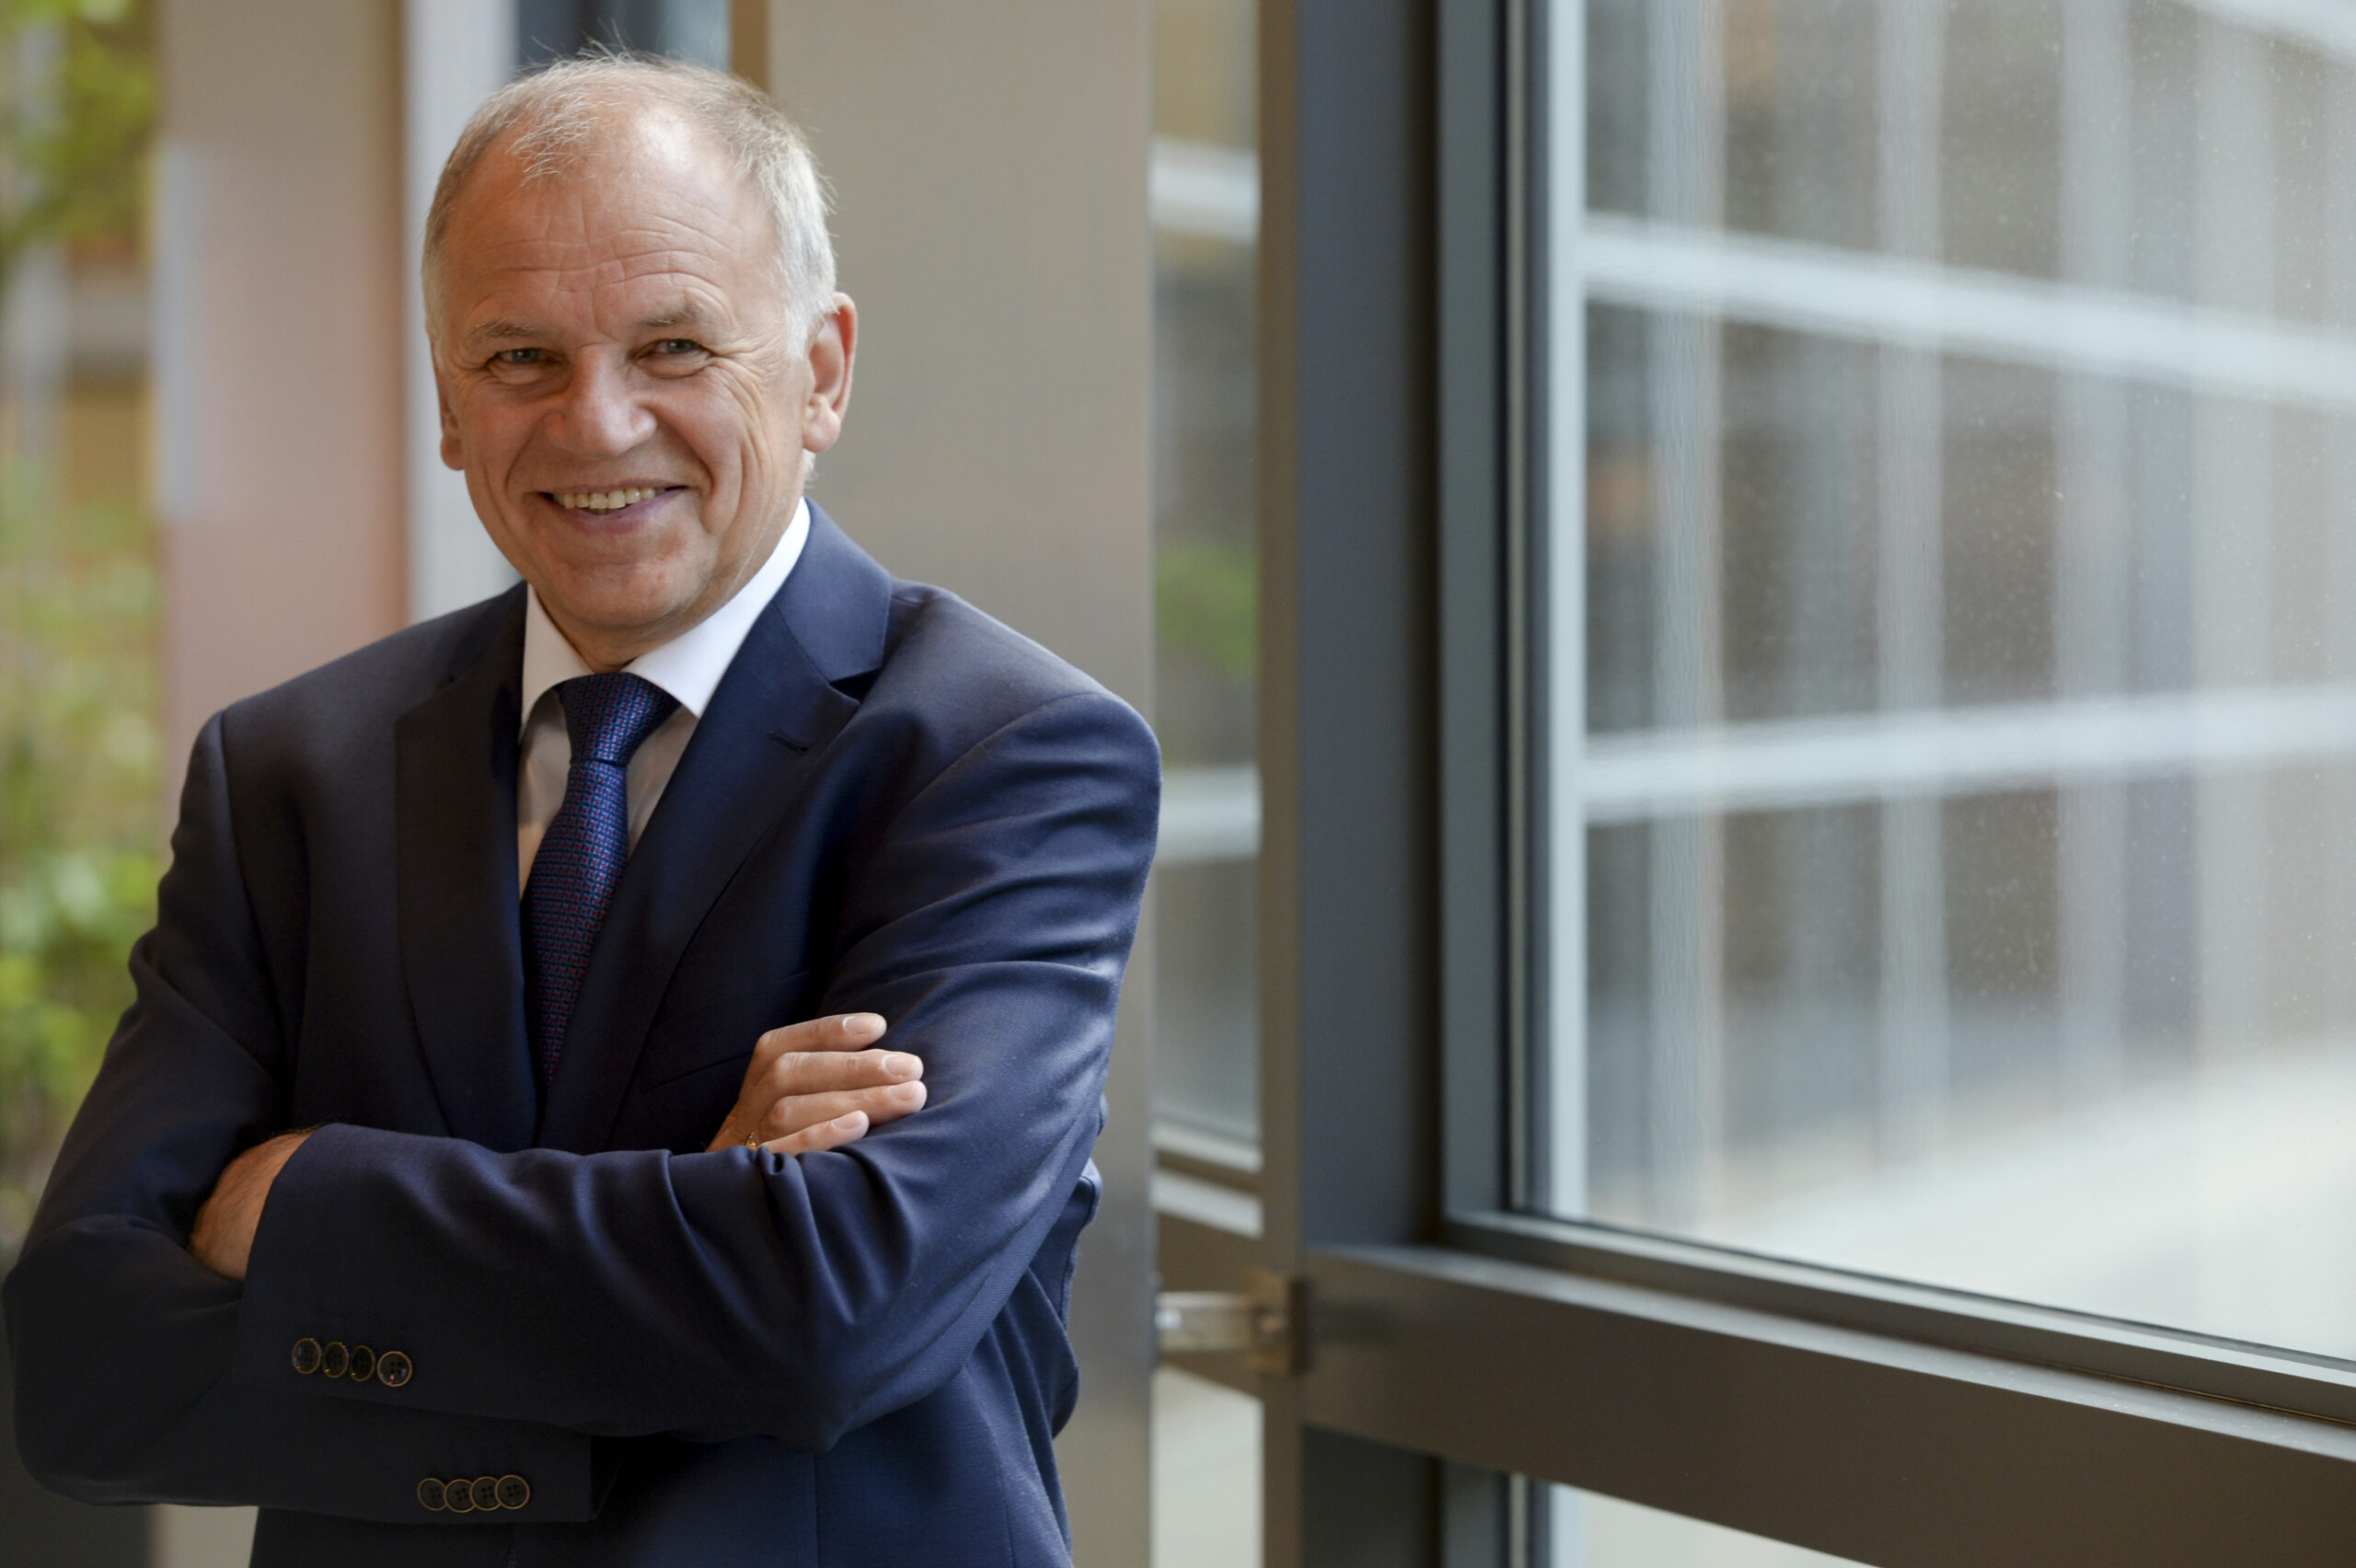 Our interview with Commissioner Andriukaitis: Insights on the management of the health-related challenges of migration